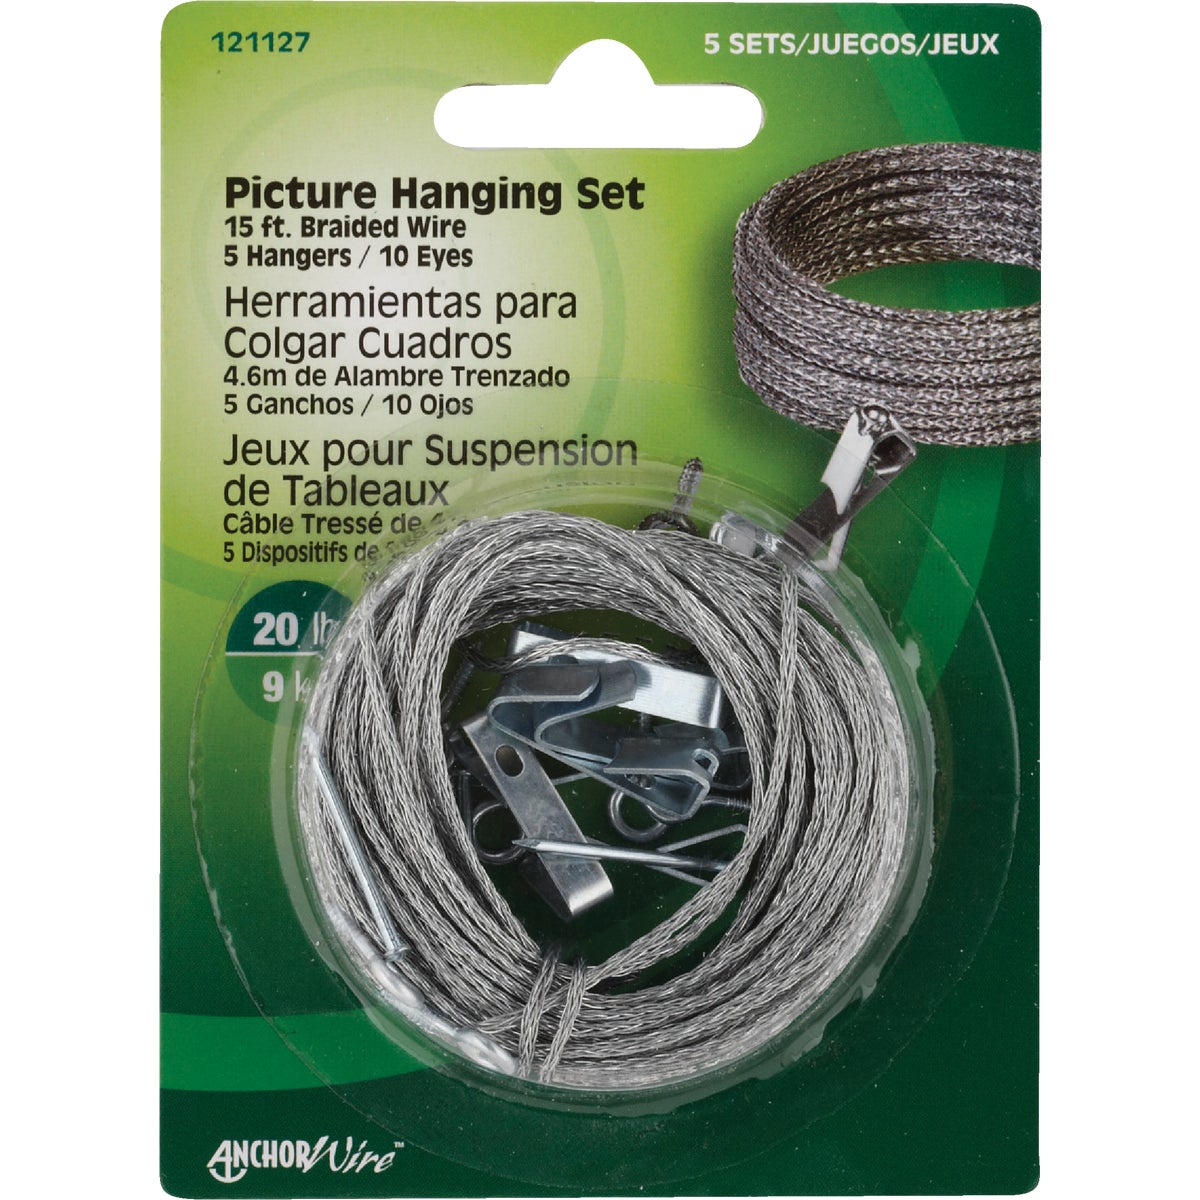 Hillman Anchor Wire 20 Lb. Capacity Picture Hanging Kit